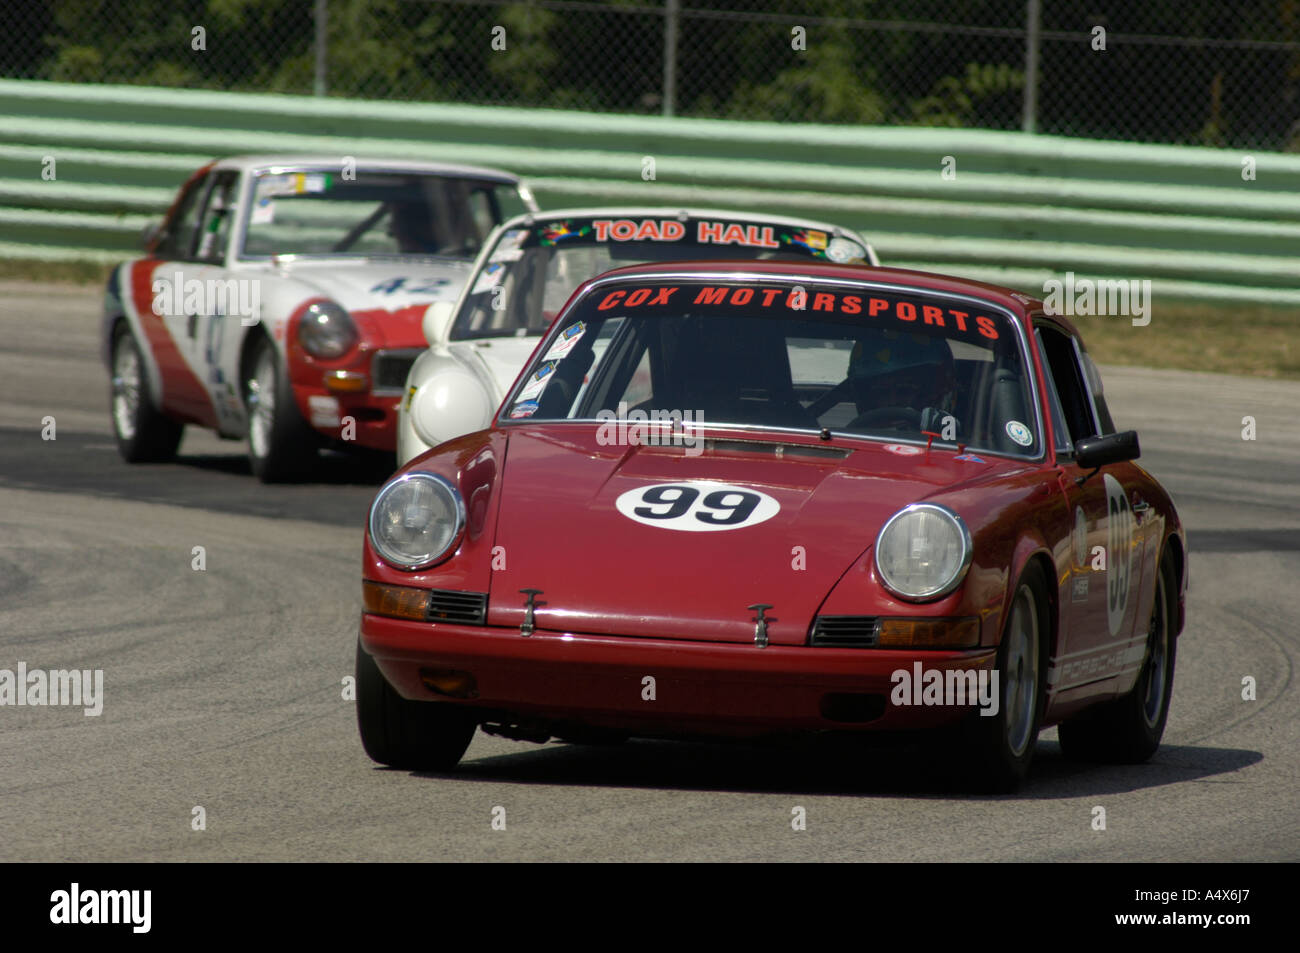 Rich Banks races his 1967 Porsche 911S at the 2005 Brian Redman International Challenge at Road America Stock Photo